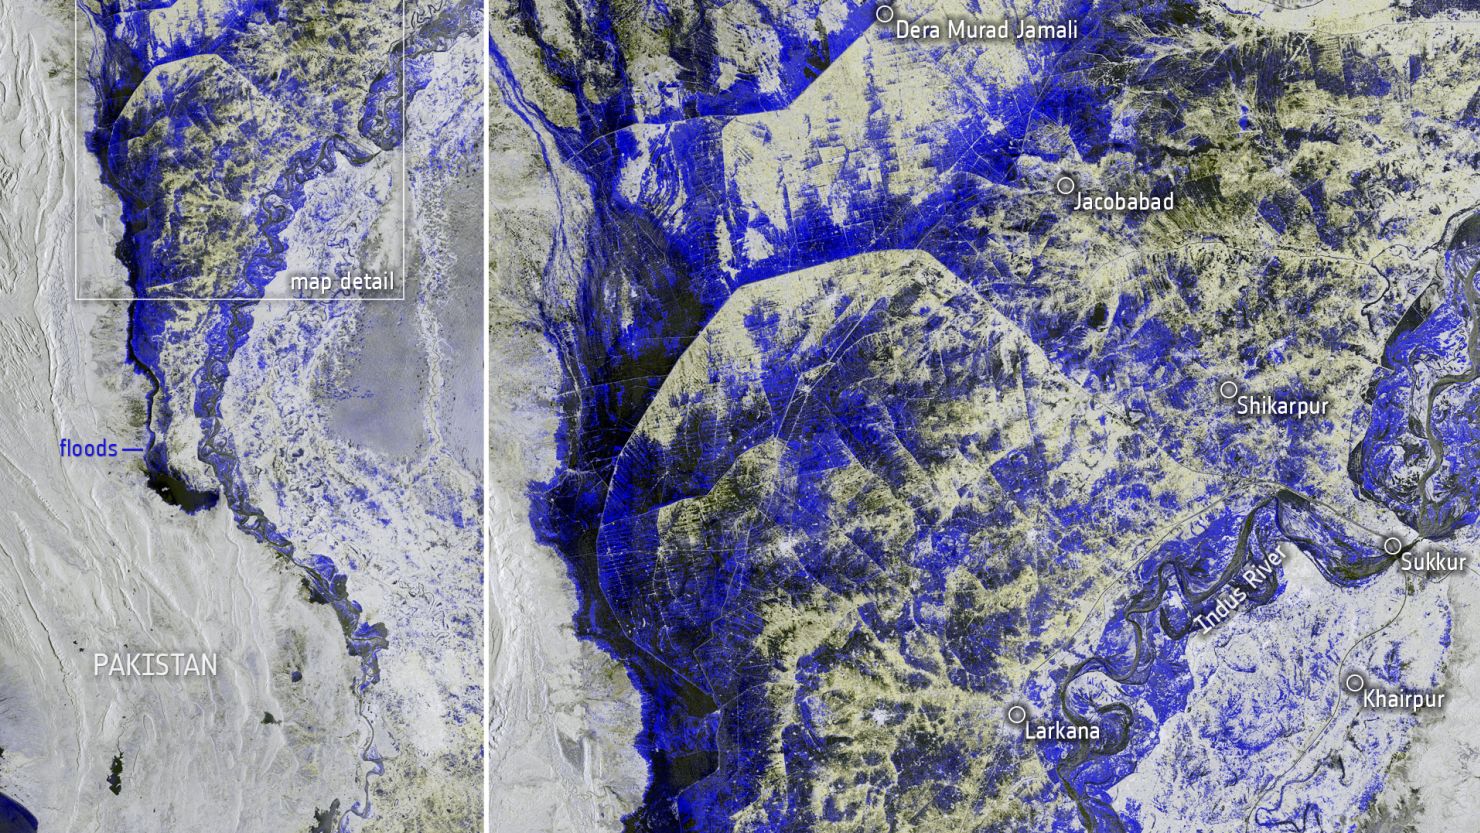 A European Space Agency satellite image on August 30, 2022 shows the extent of flooding that has devastated Pakistan.